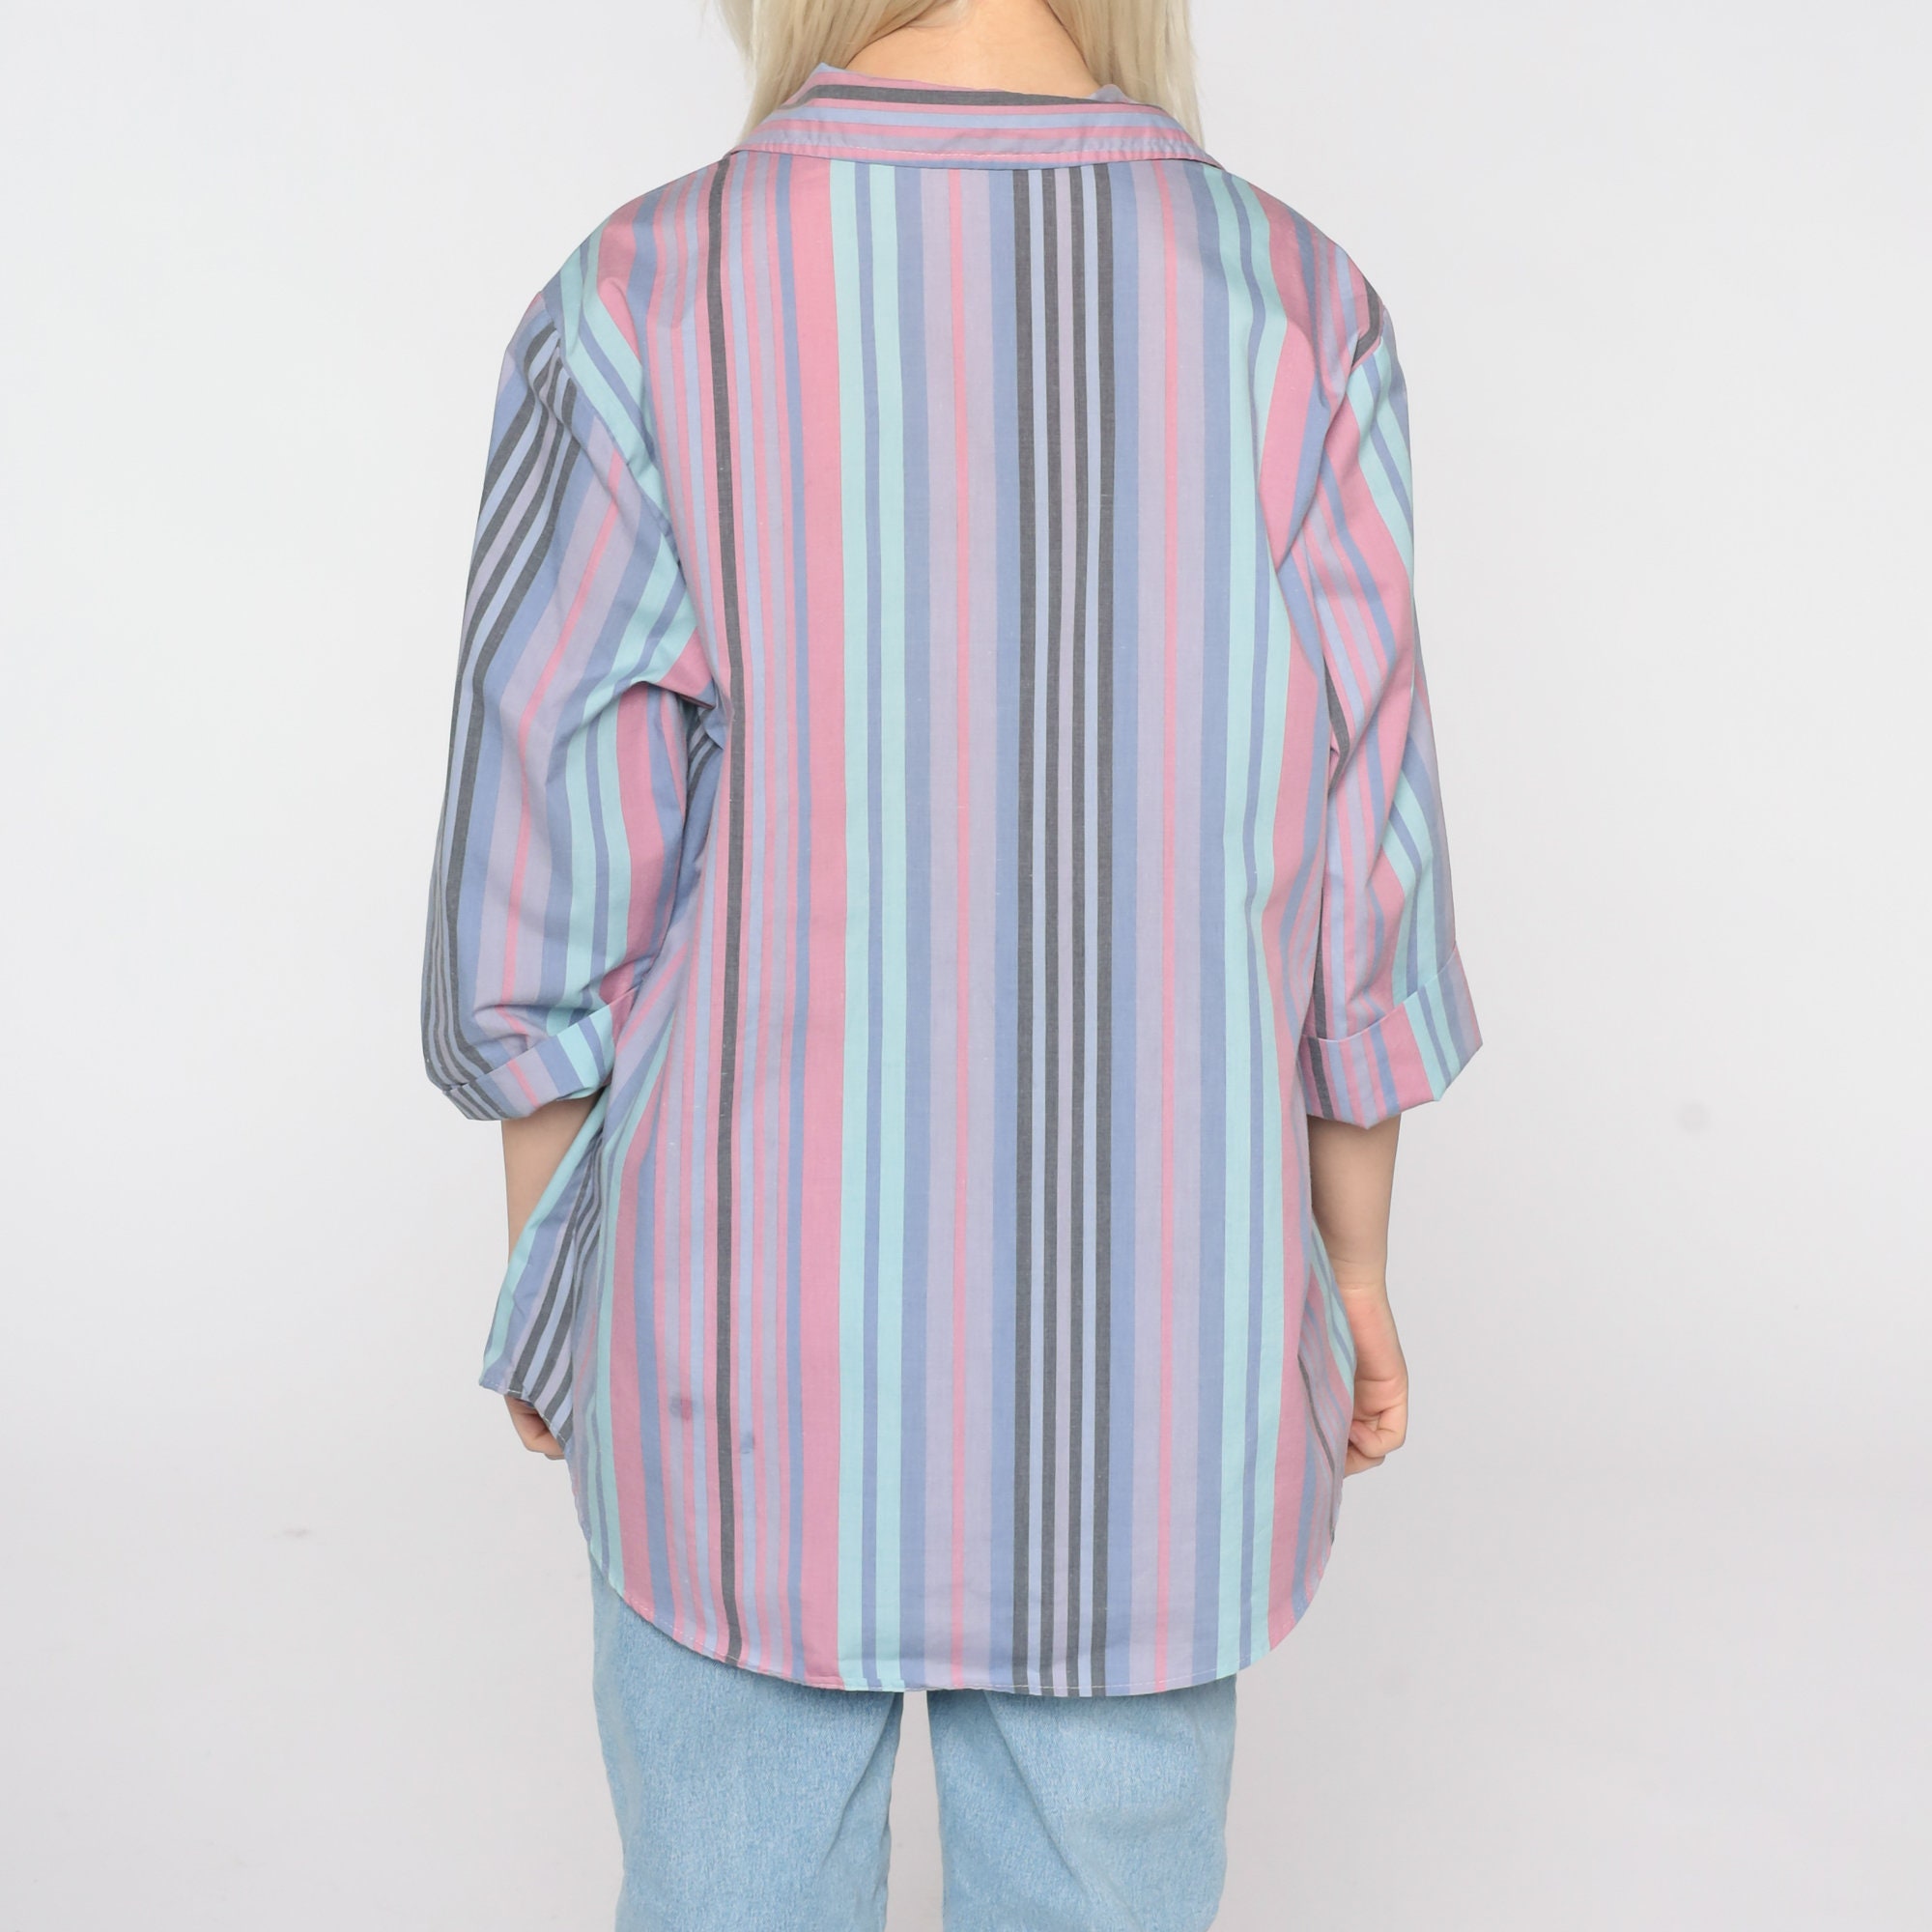 80s Button Up Shirt STRIPED Blouse Pink Purple Blue 3/4 Sleeve Top ...